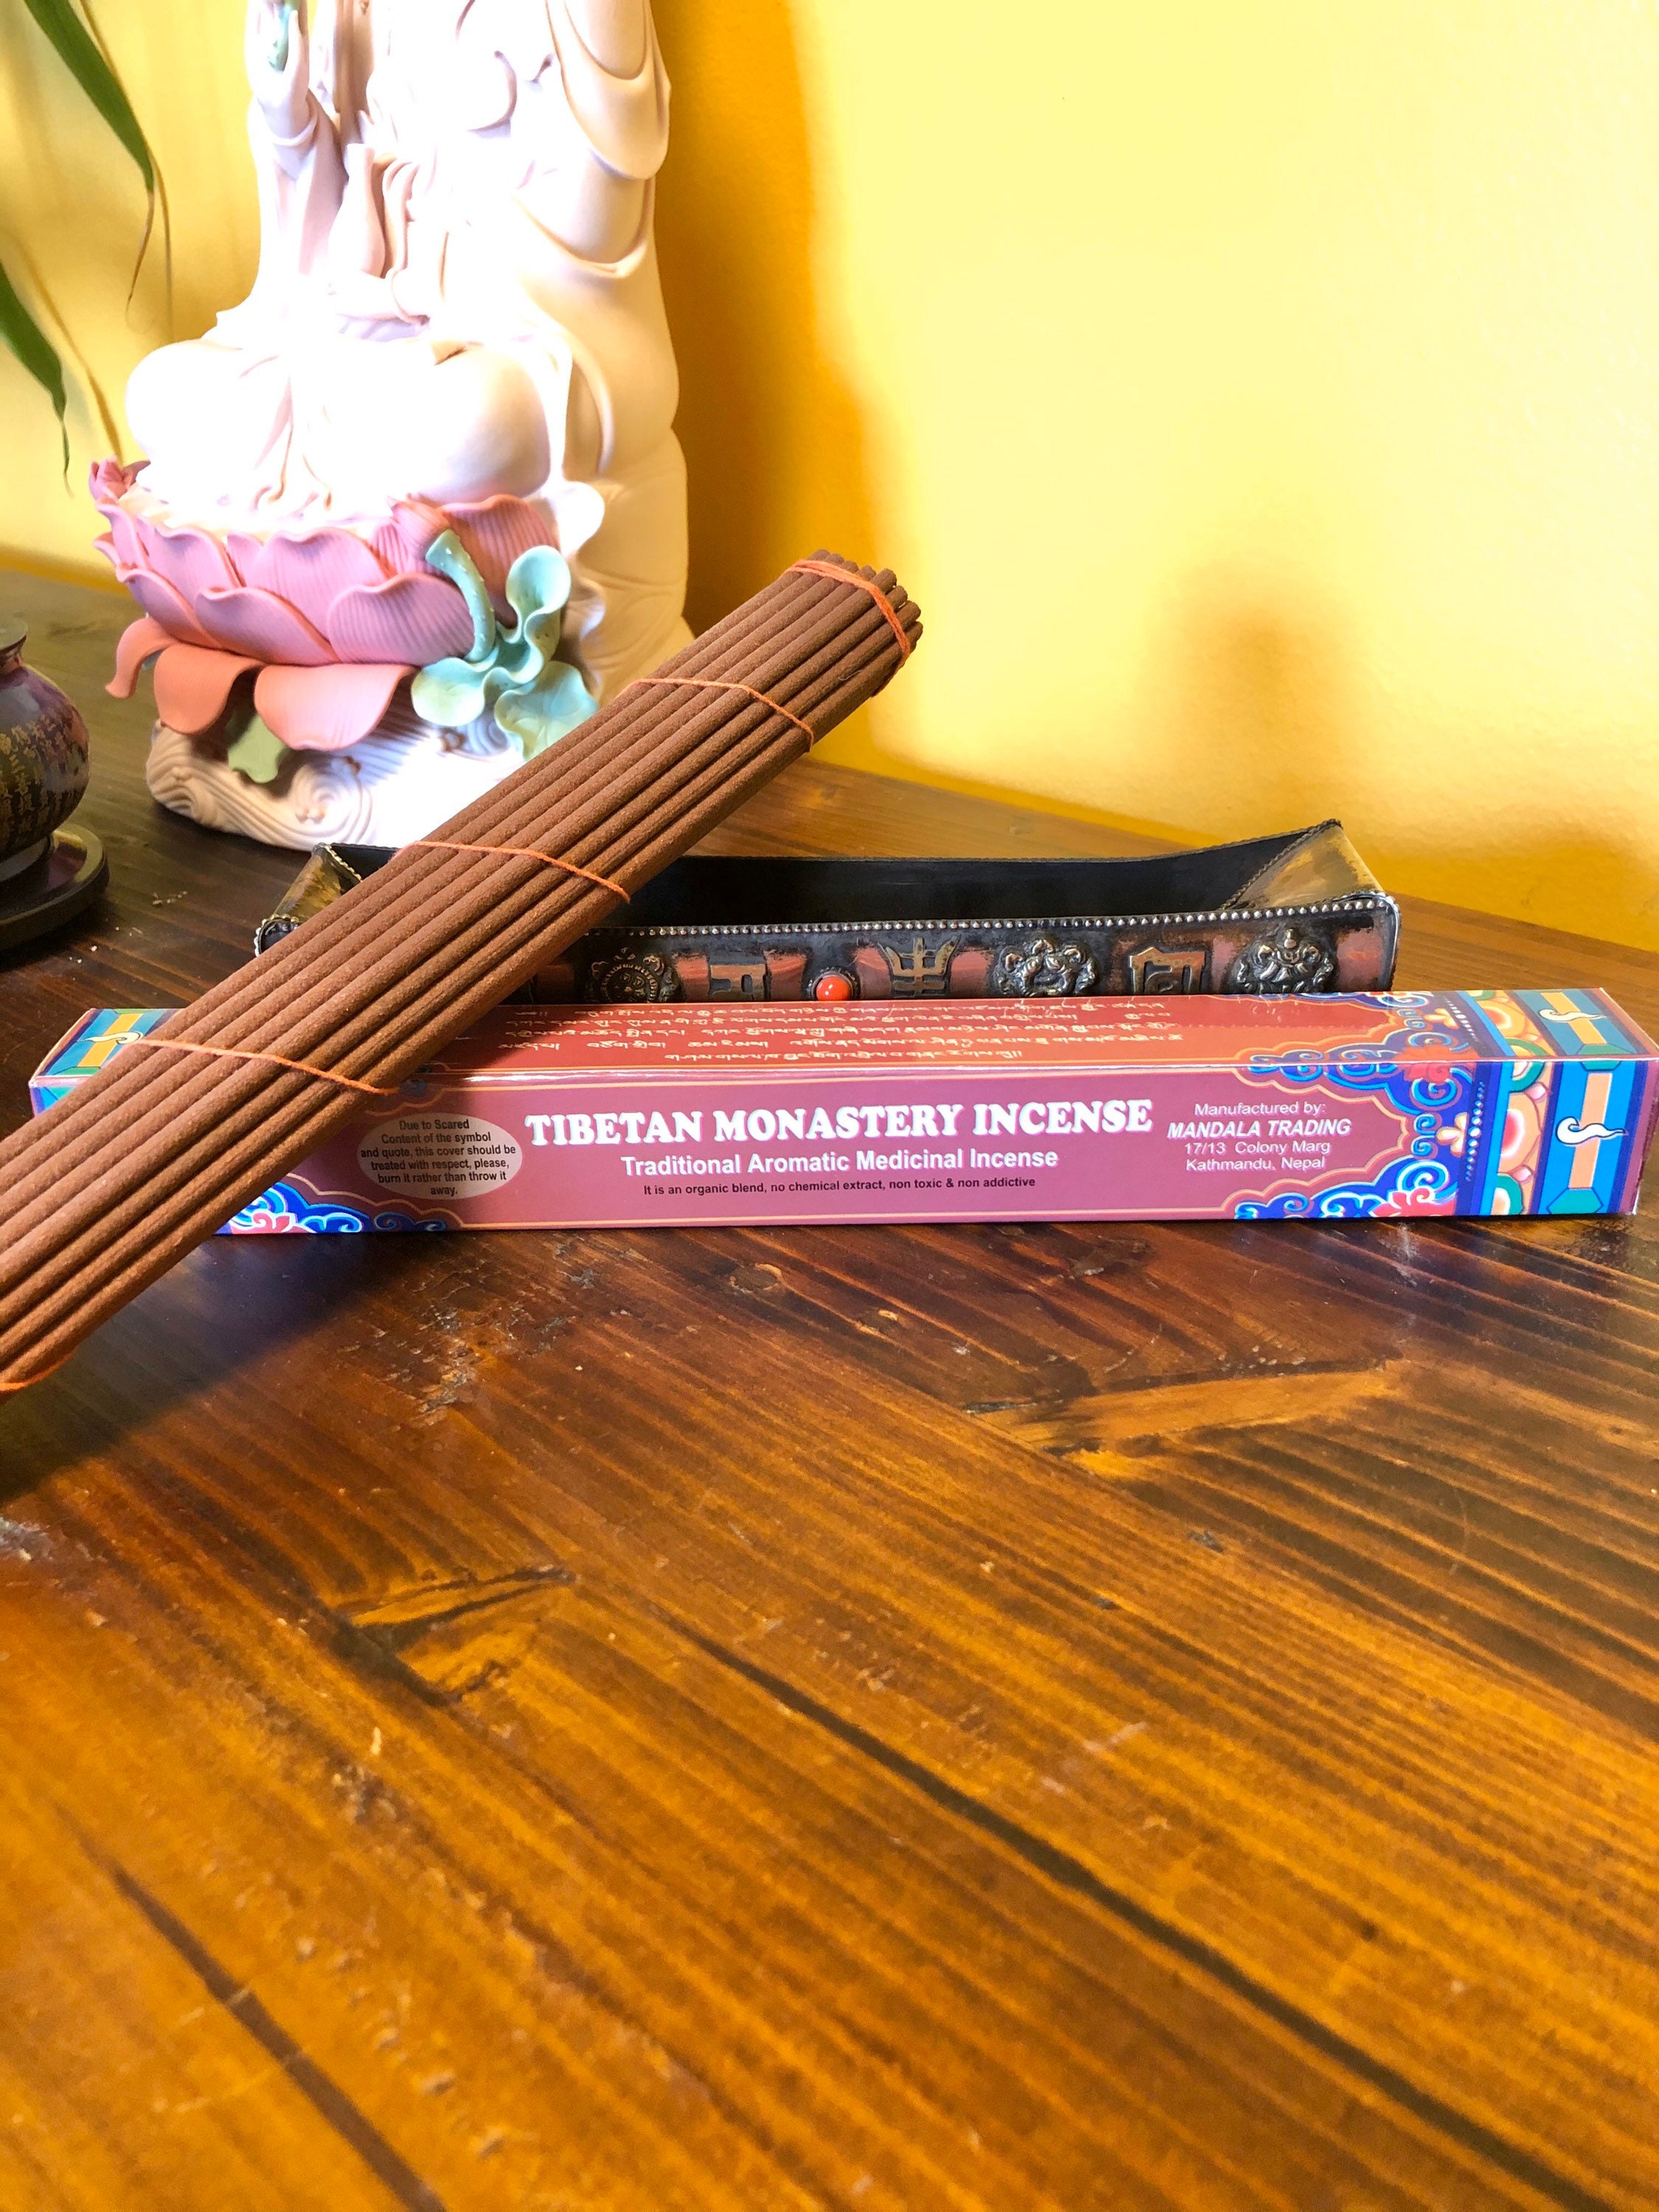 100gr Vatopedi Walnut Traditional Orthodox Christian Incense from Mount  Athos